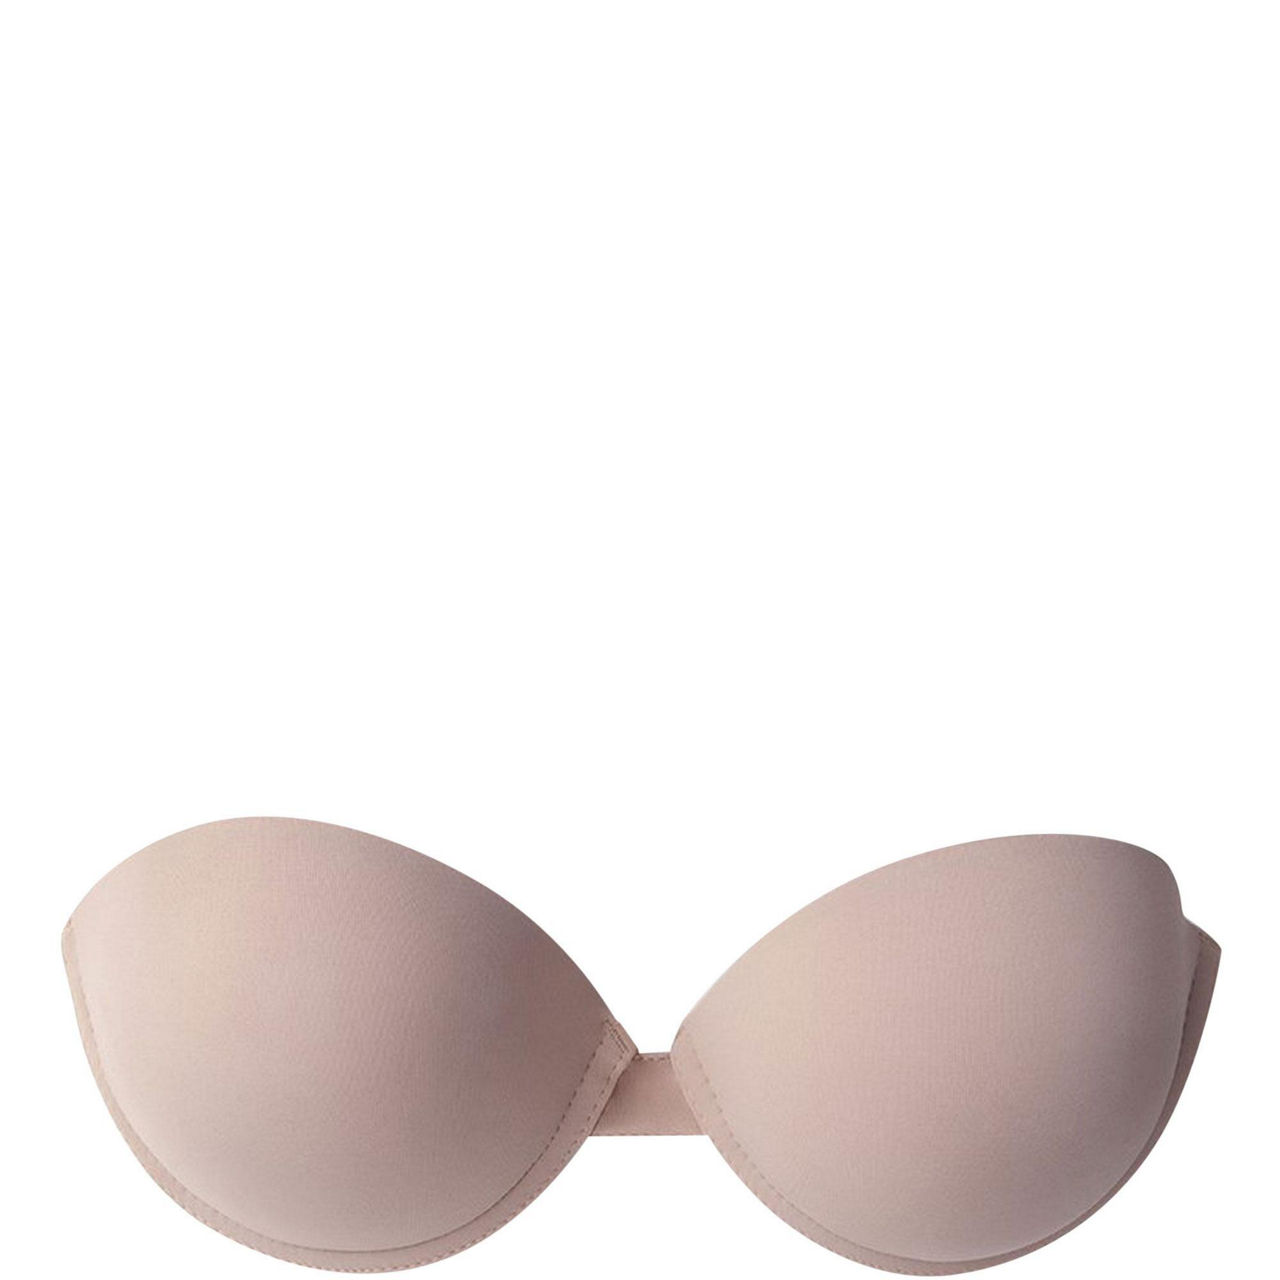 Fashion Forms Go Bare Backless Strapless Bra